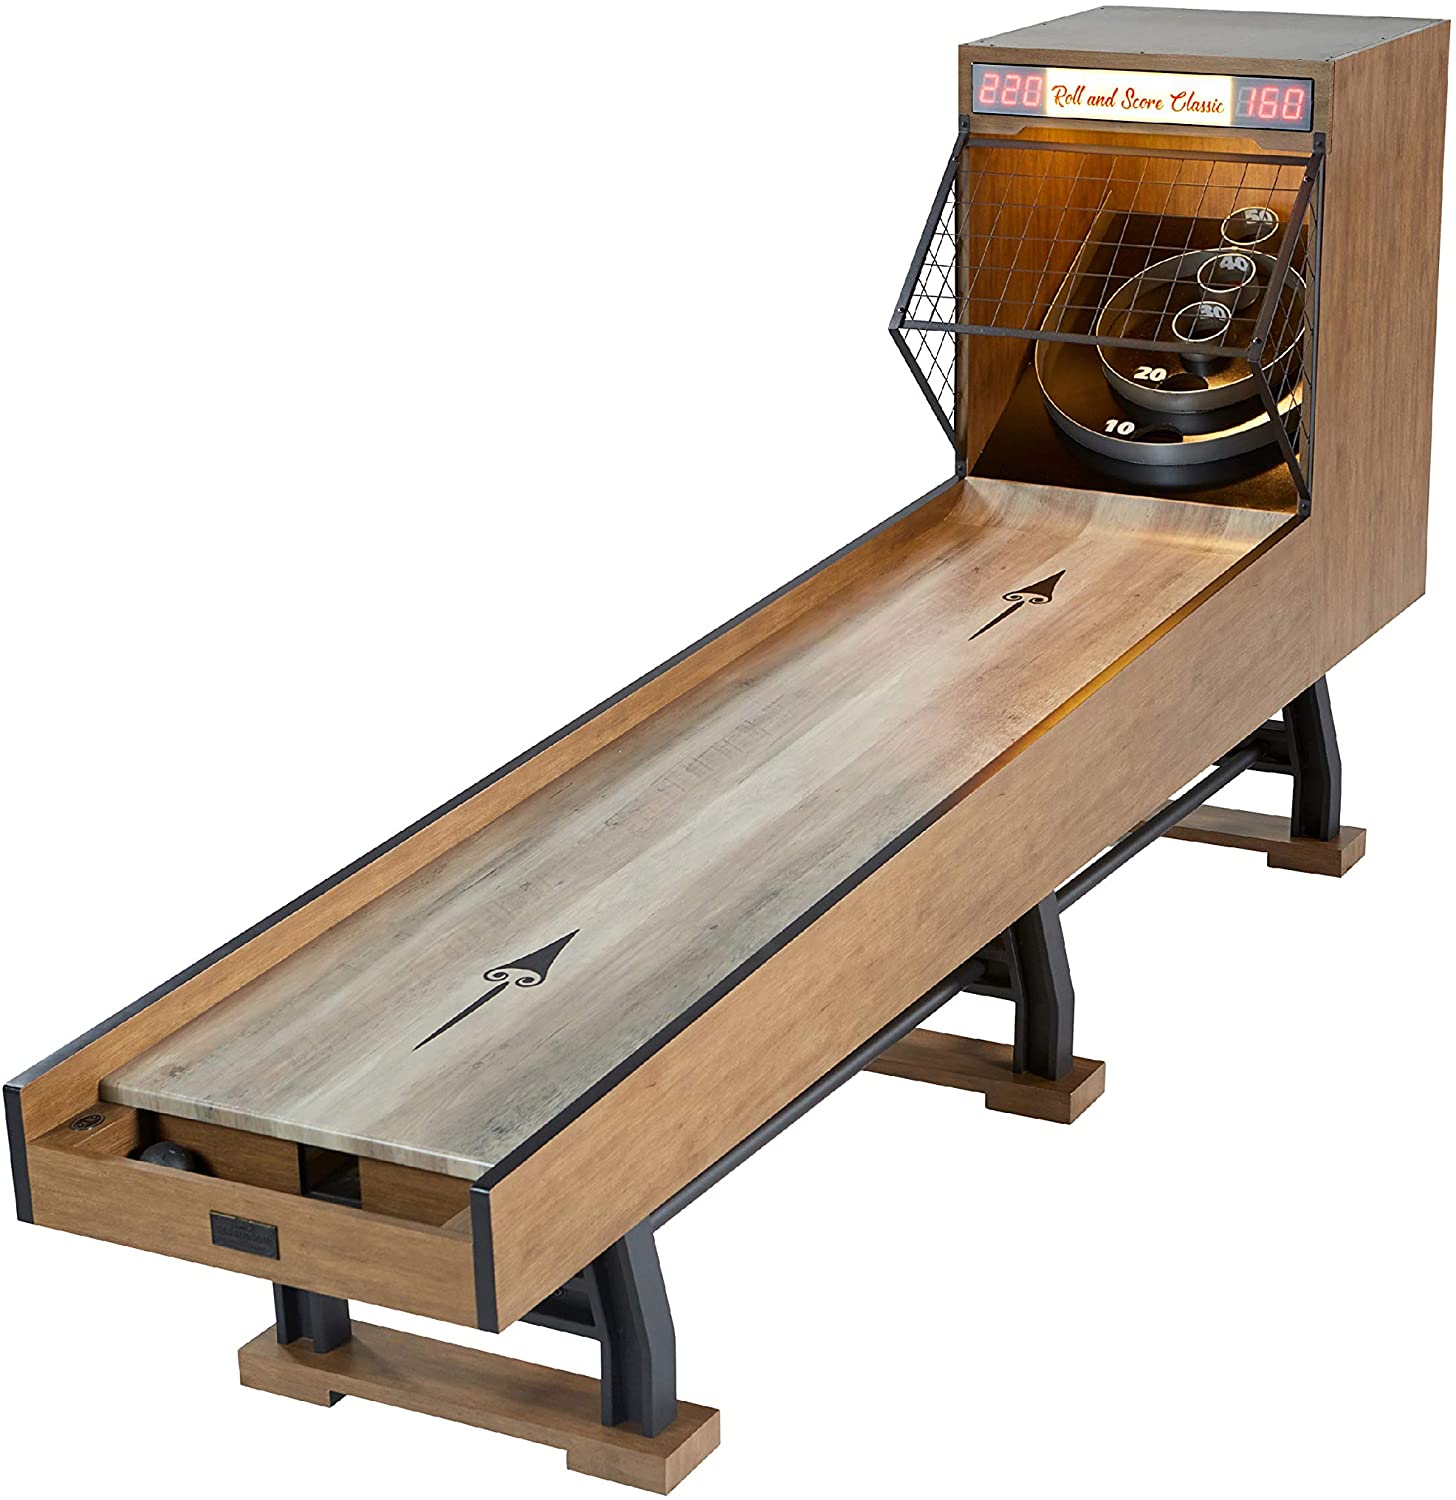 Barrington Collection Premium Roll and Score Game